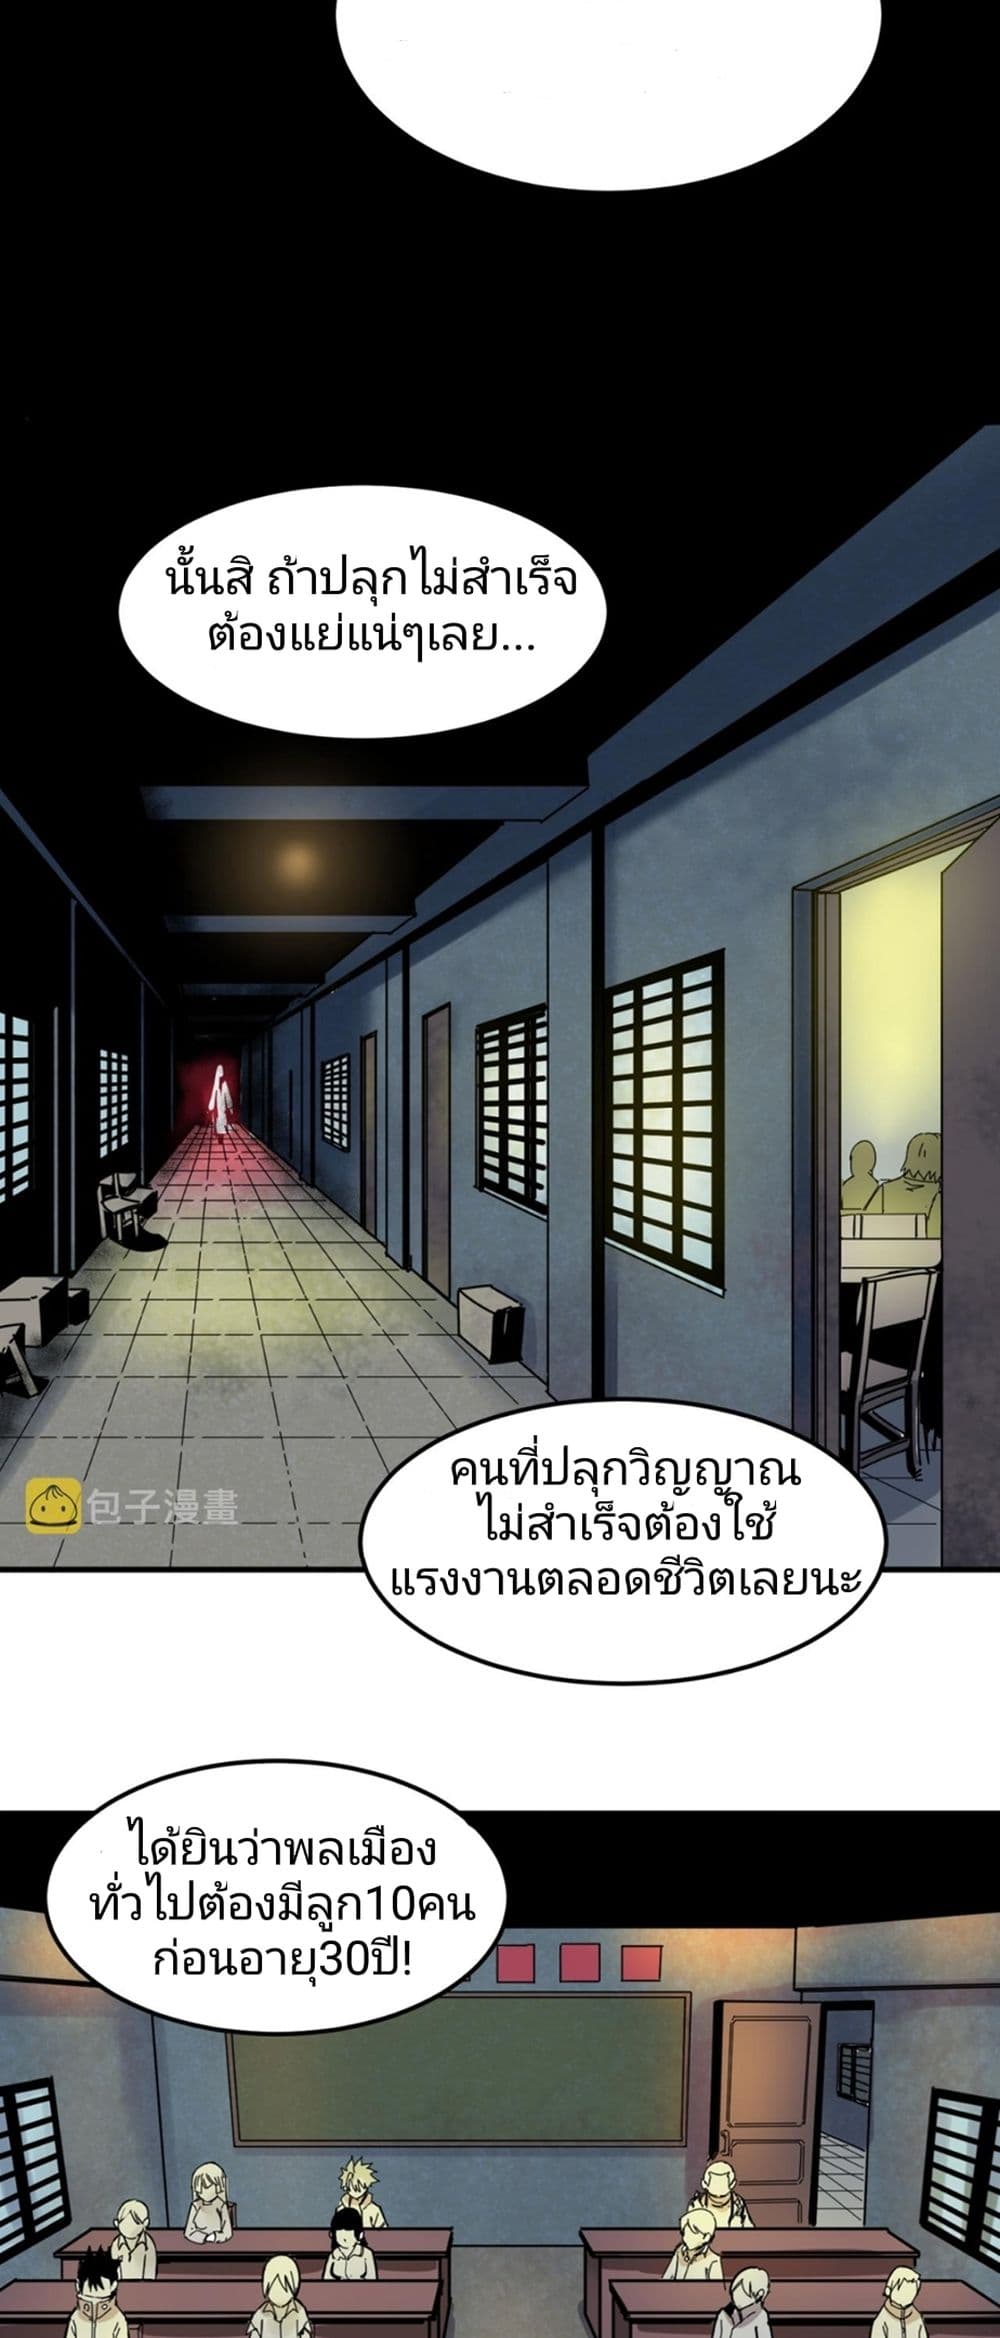 The Age of Ghost Spirits à¸à¸­à¸à¸à¸µà¹ 1 (9)